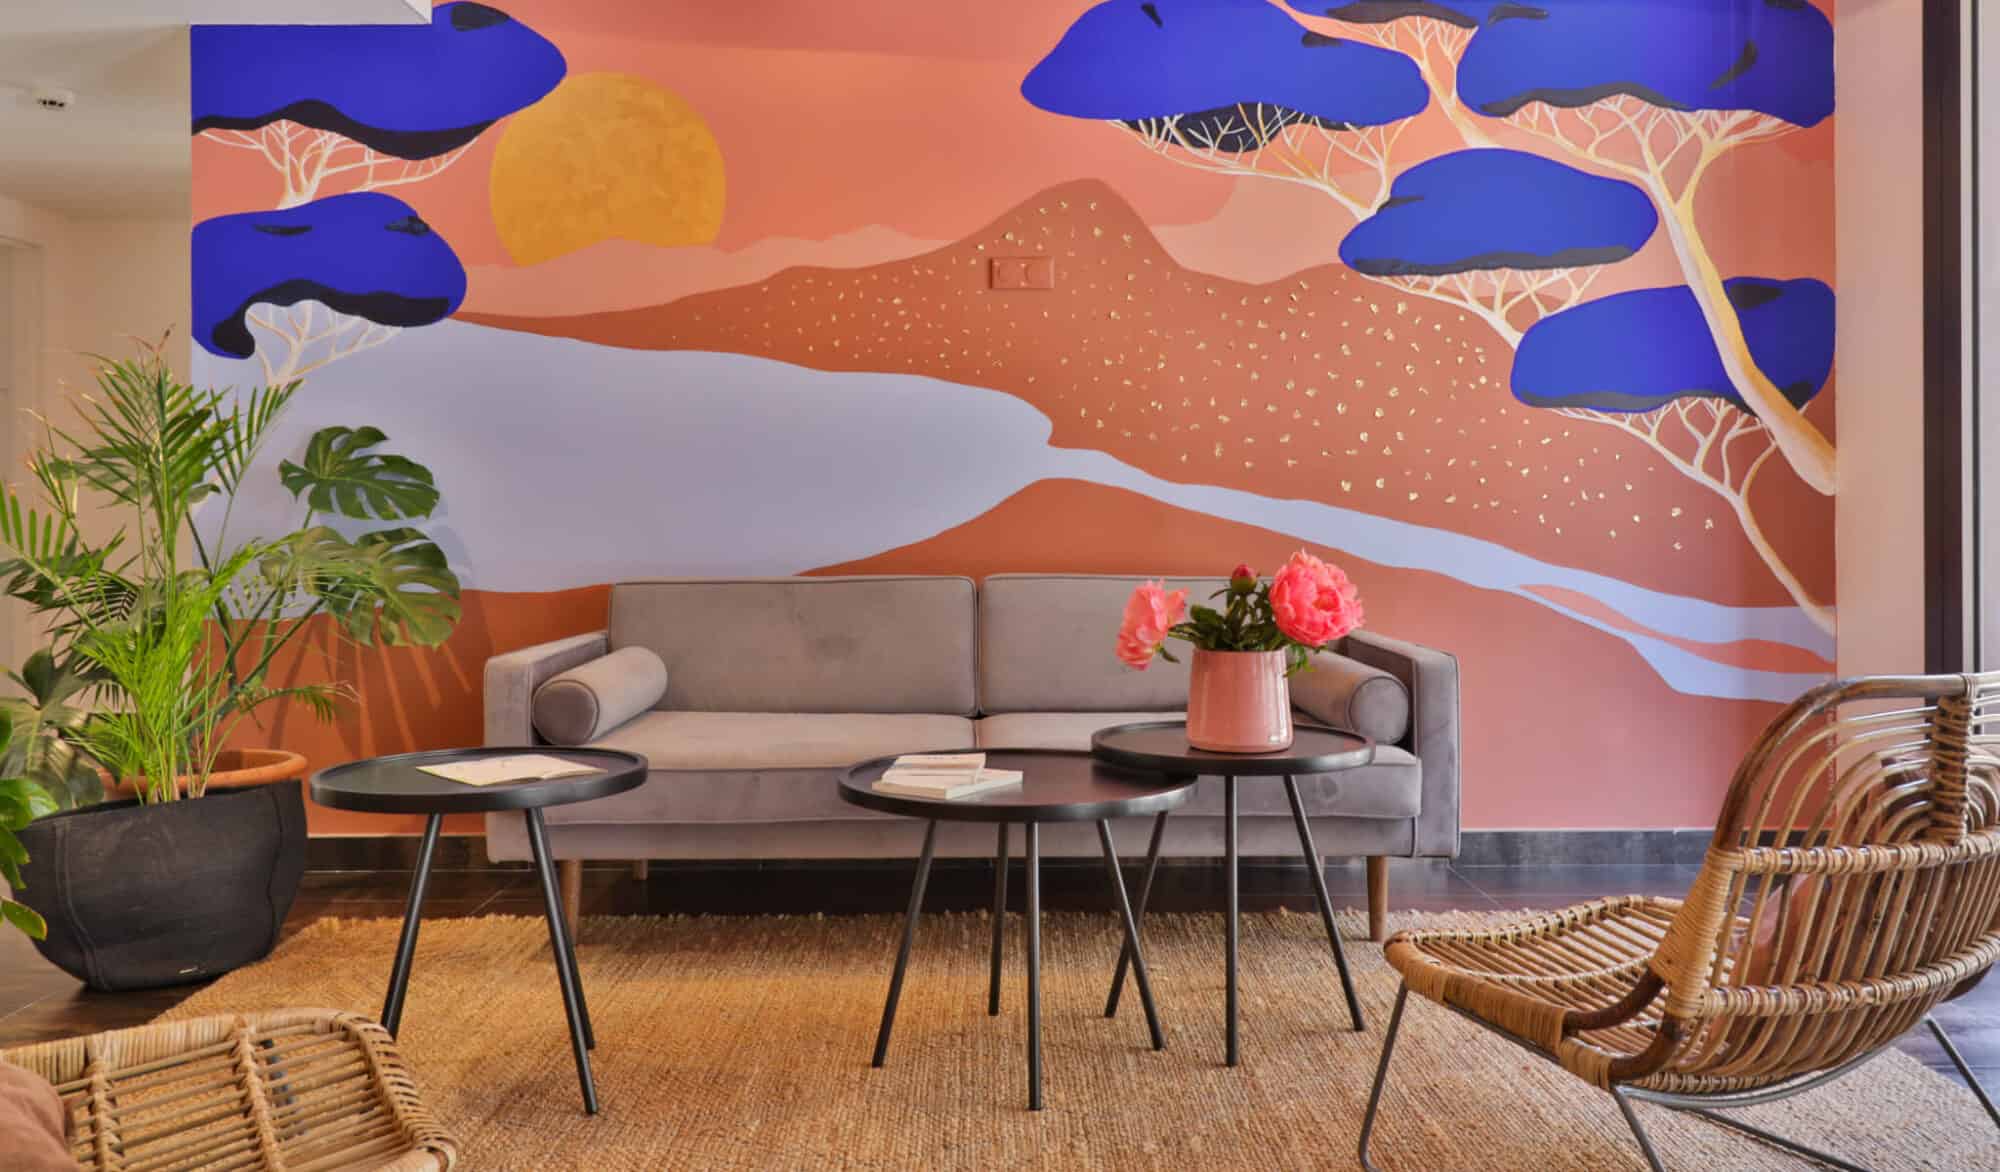 A hotel lobby with pink and blue painted walls, wooden chairs, and black coffee tables.